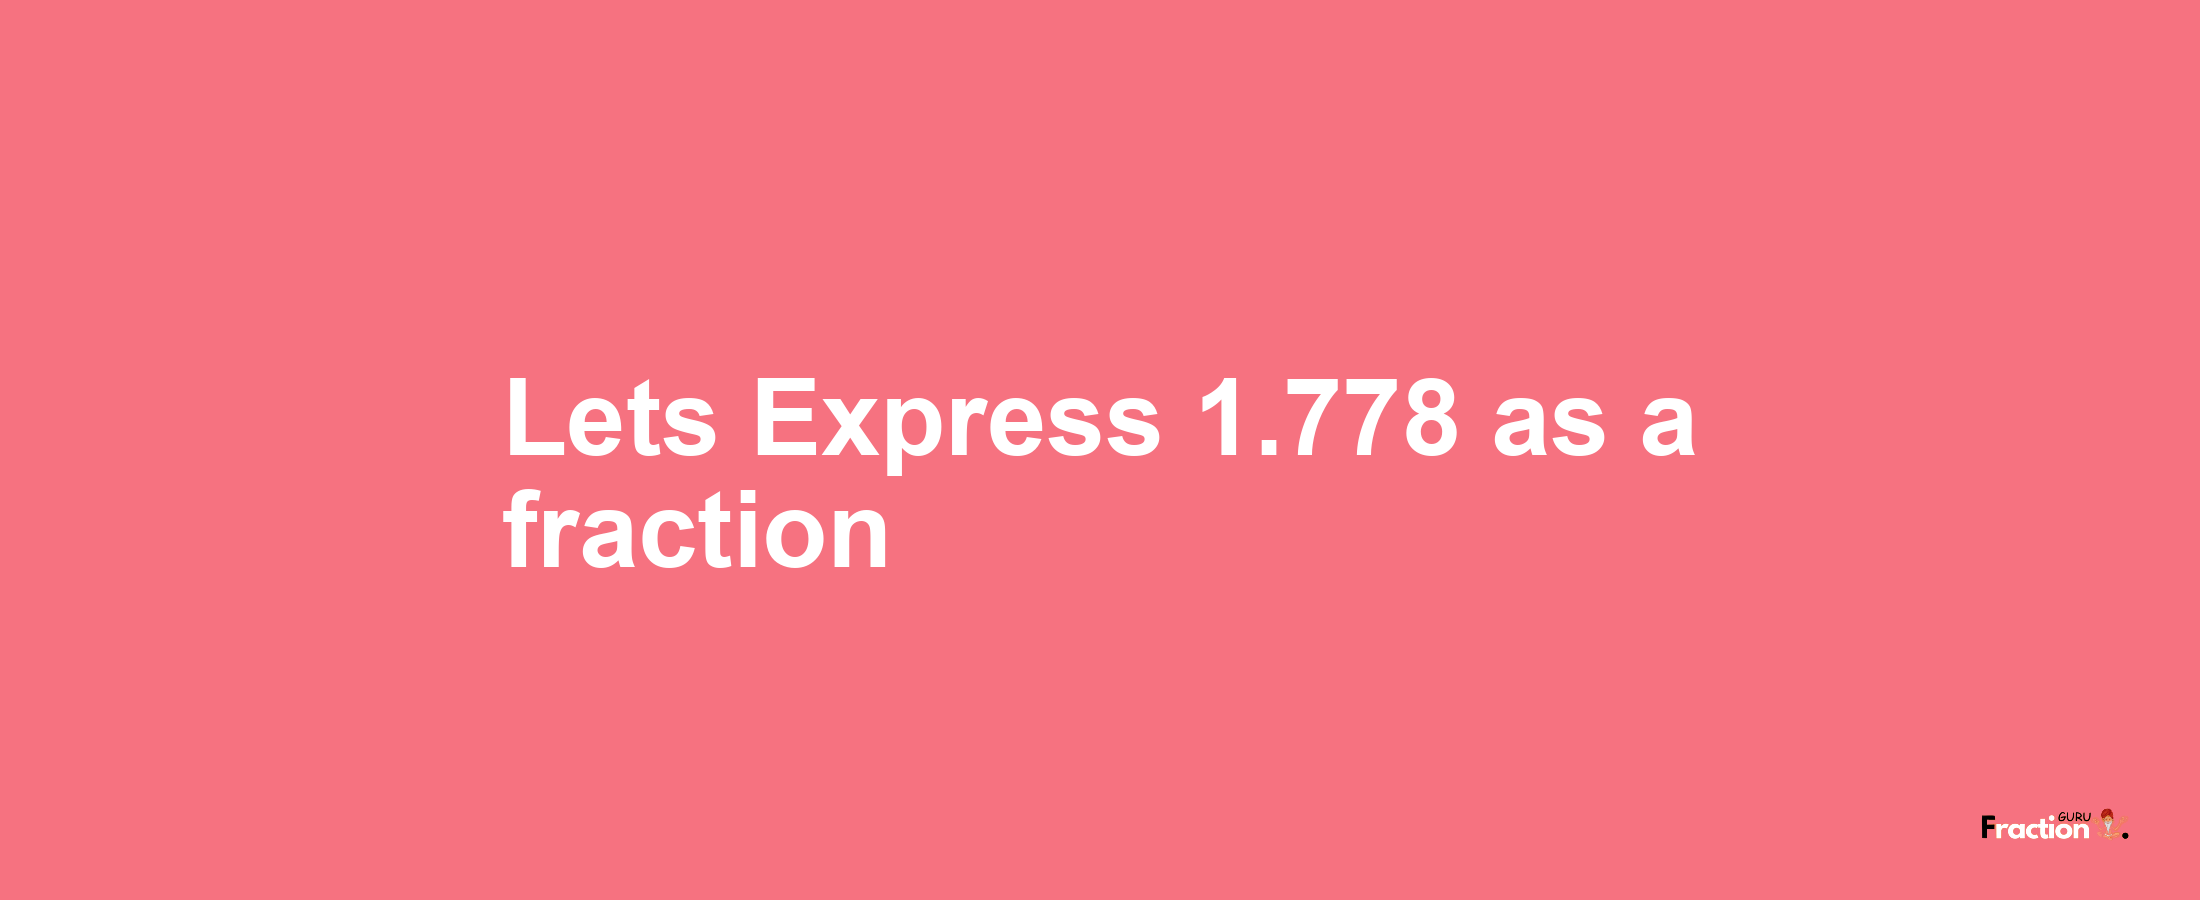 Lets Express 1.778 as afraction